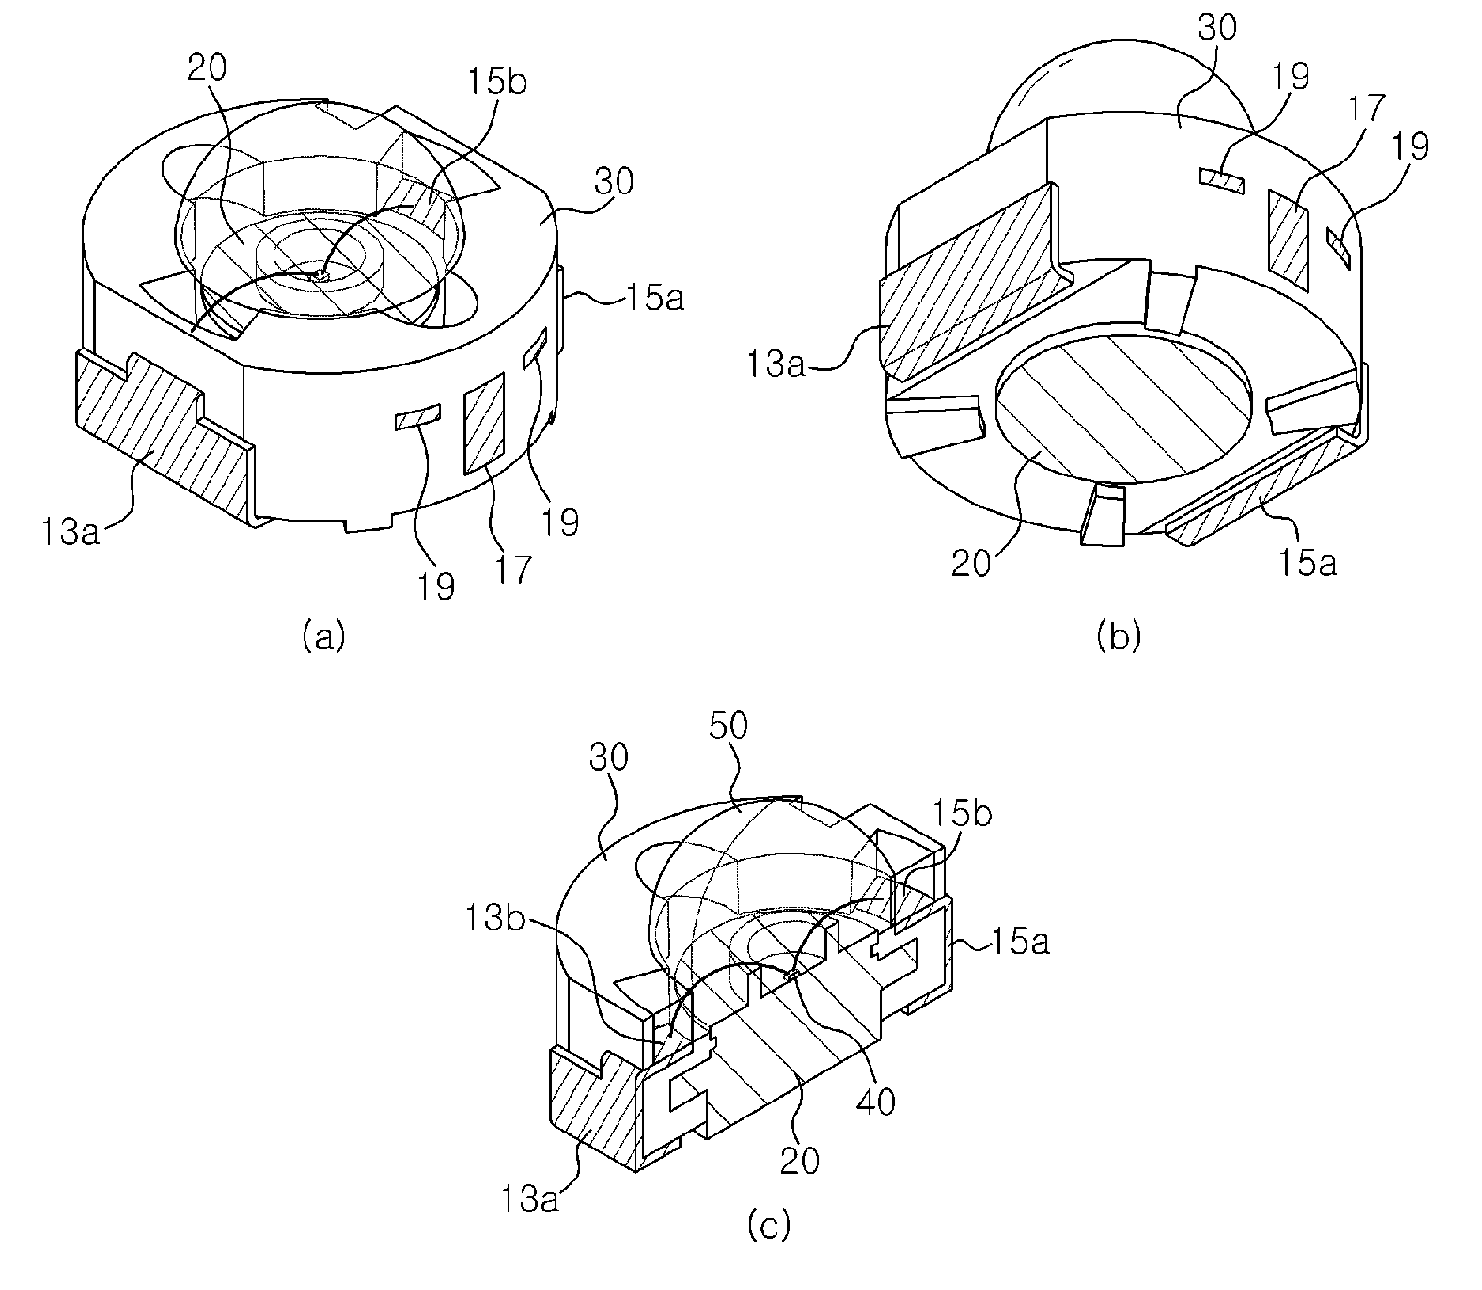 Leadframe having a heat sink supporting part, fabricating method of a light emitting diode package using the same, and light emitting diode package fabricated by the method